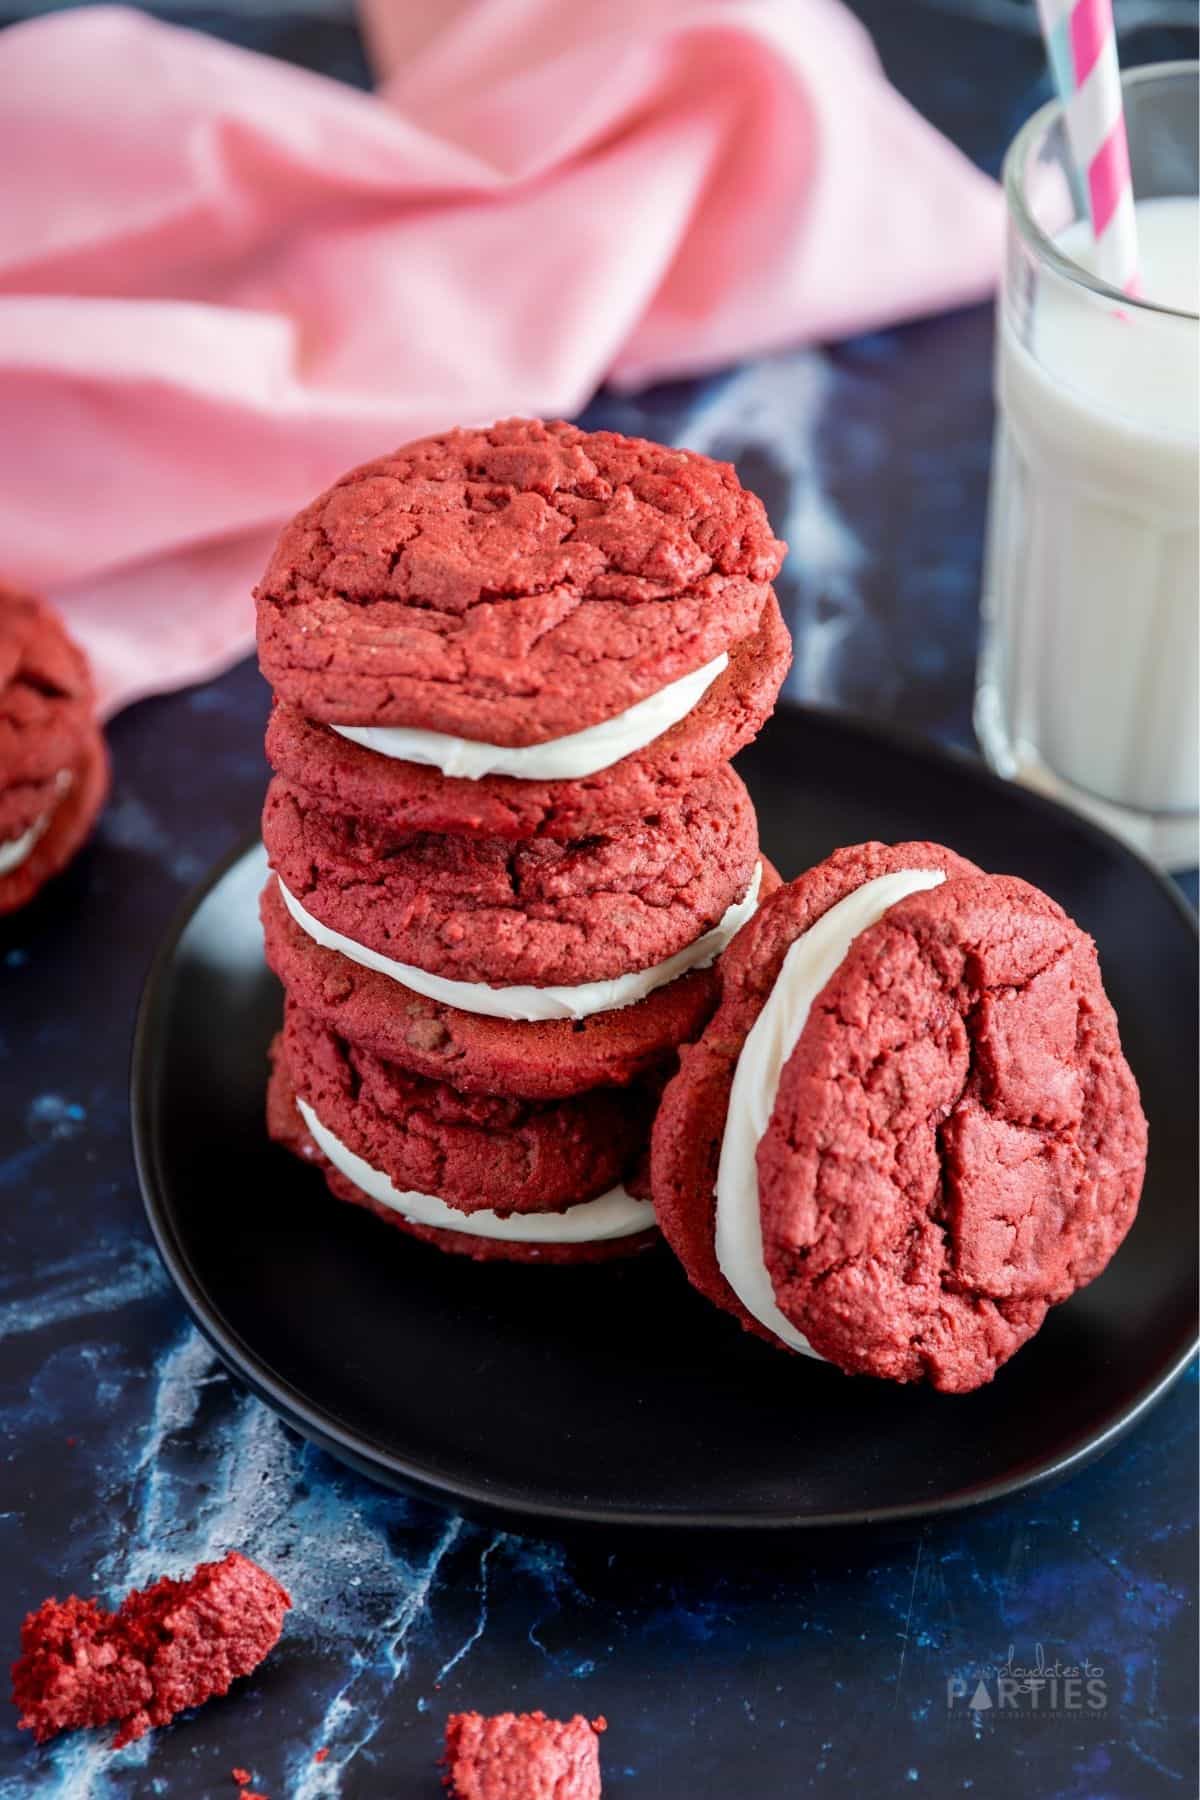 Red velvet cookie sandwiches piled on a black plate with a pink napkin in the background.